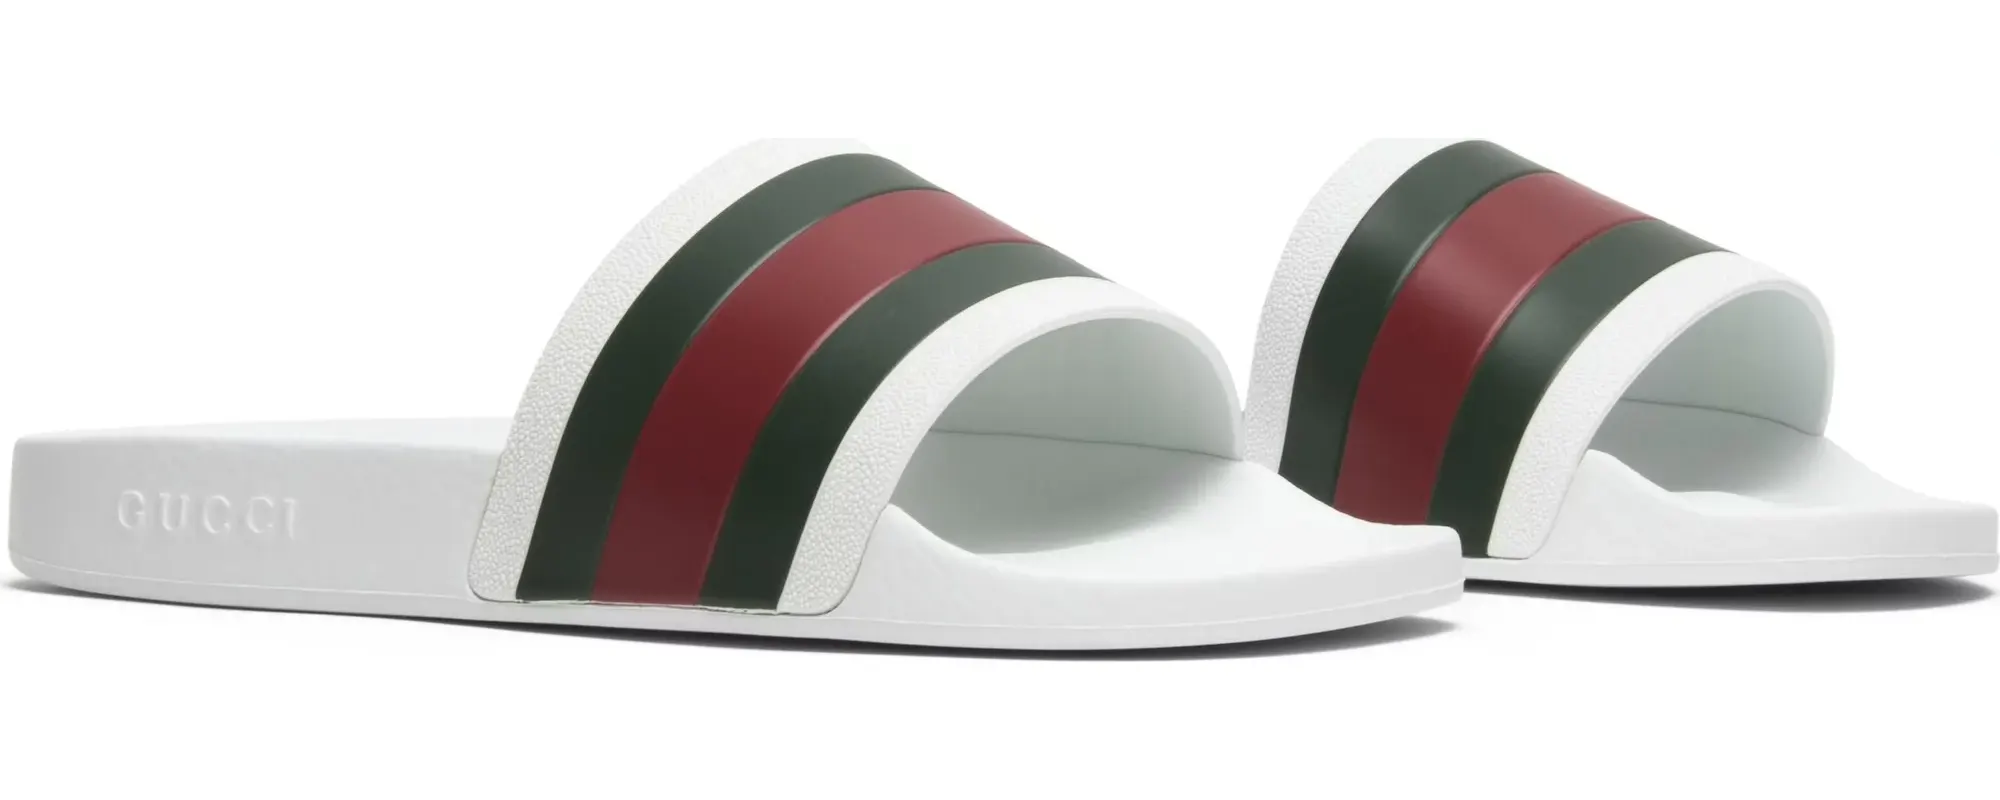 Style Guide: Best Gucci Slides for Summer 2022